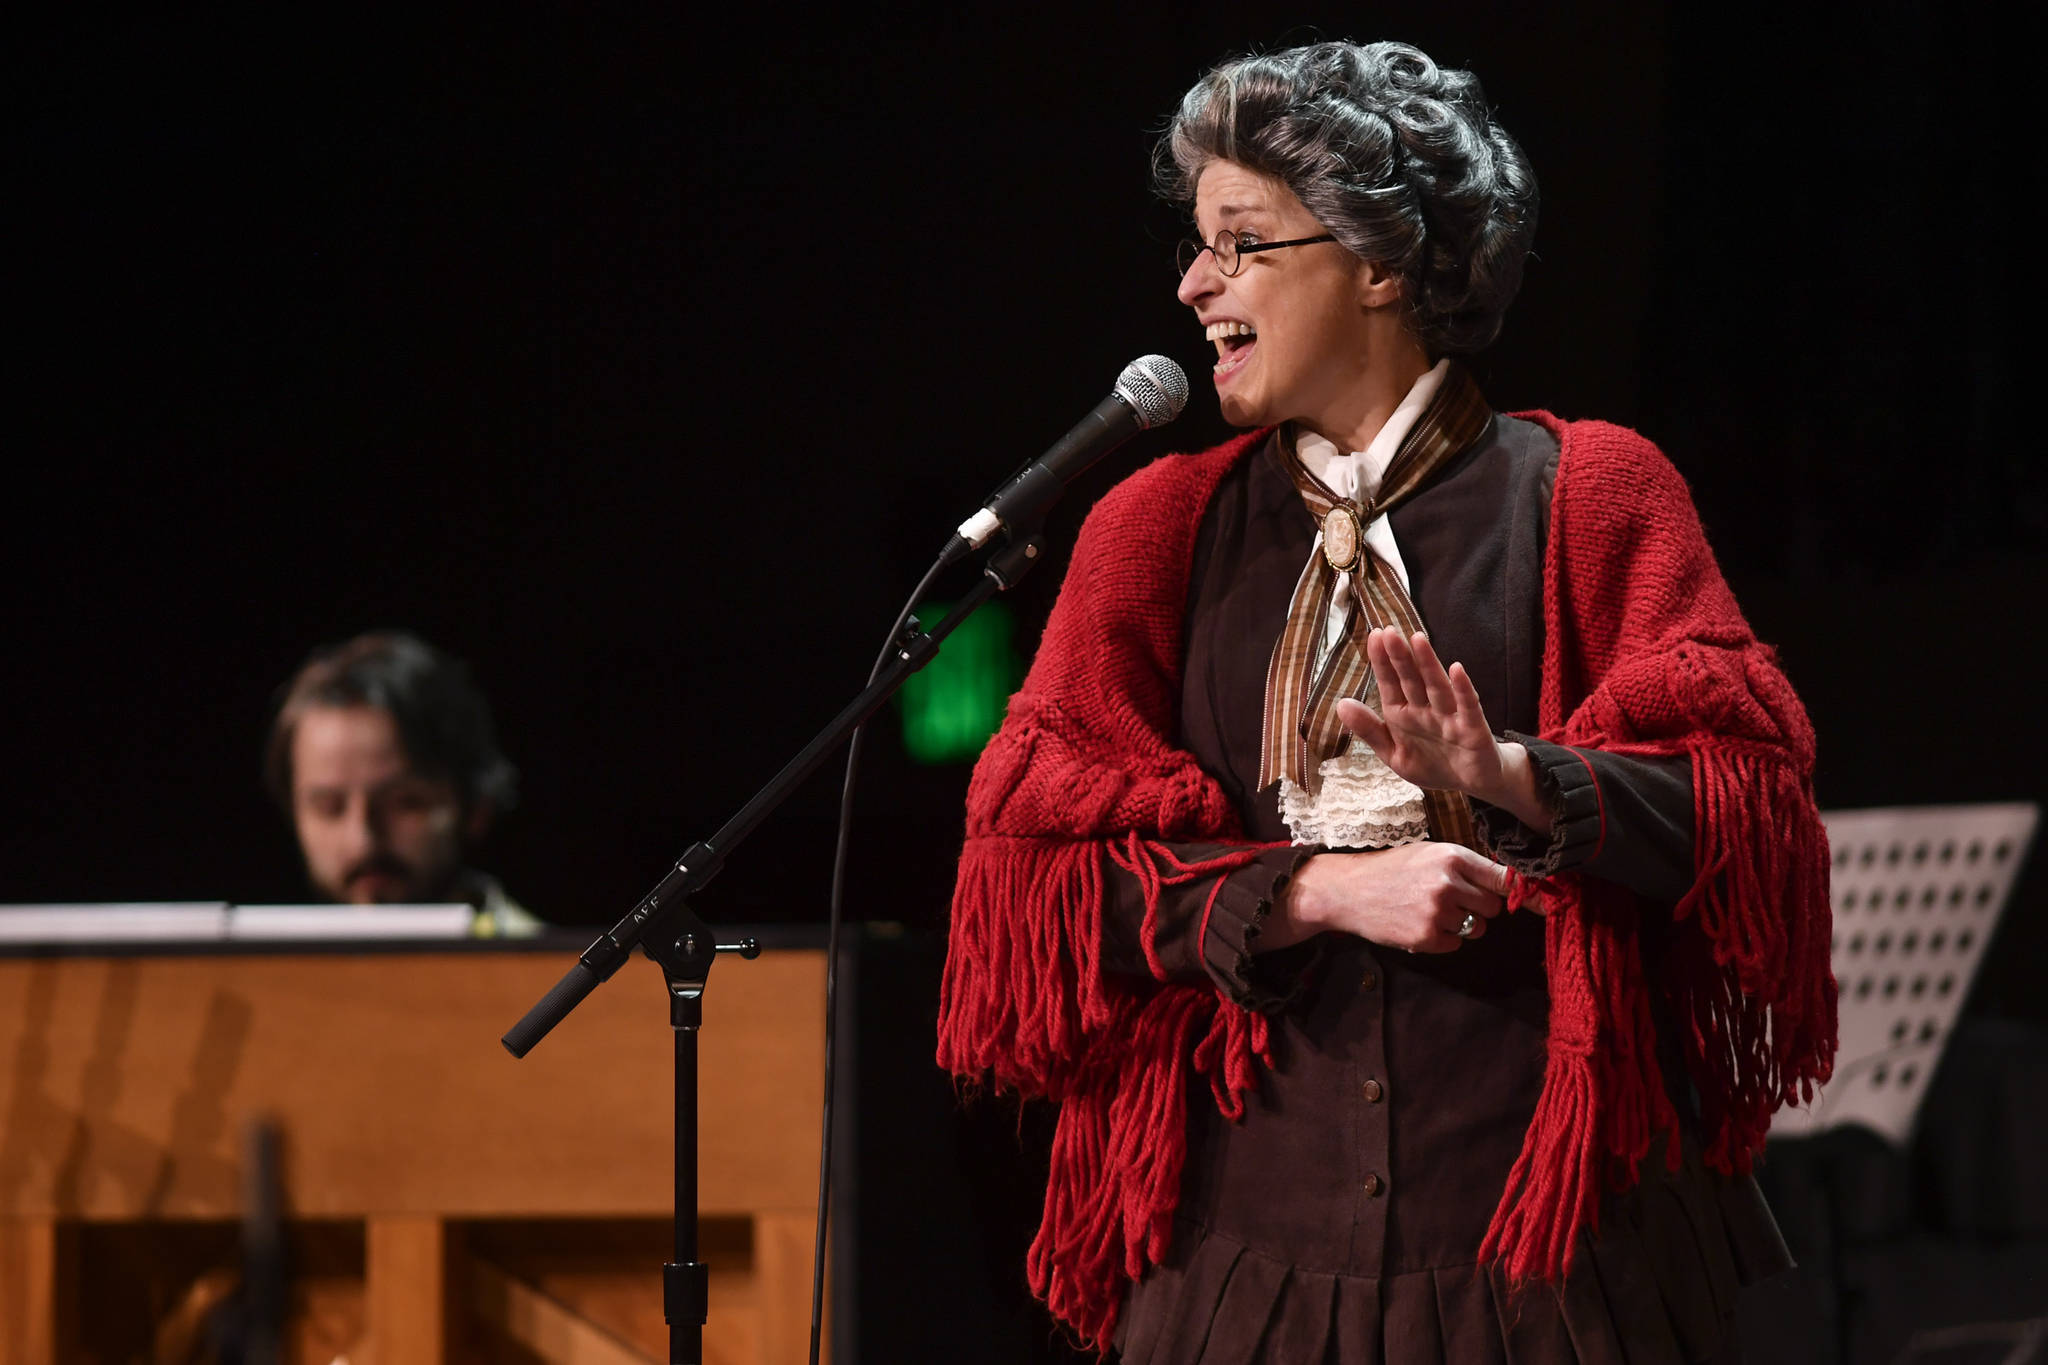 Patricia Hull, of Juneau, accompanied by Jon Hays, performs as “The Most Dangerous Woman in America” at the 45th annual Alaska Folk Festival at Centennial Hall on Monday, April 8, 2019. (Michael Penn | Juneau Empire)